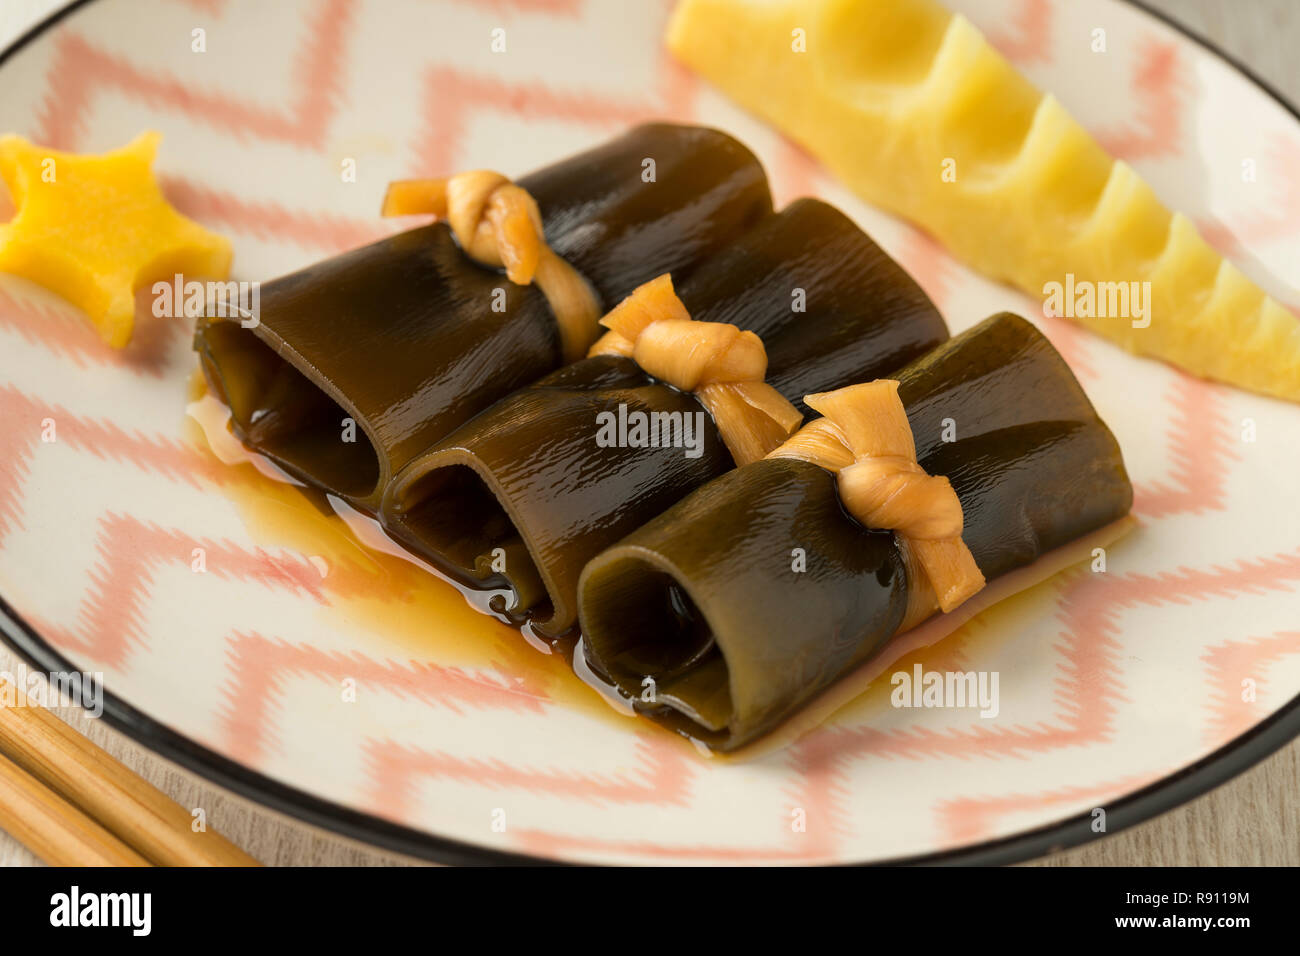 Traditional simmered kelp rolls, kobumaki, on a dish with bamboo shoot and carrot Stock Photo